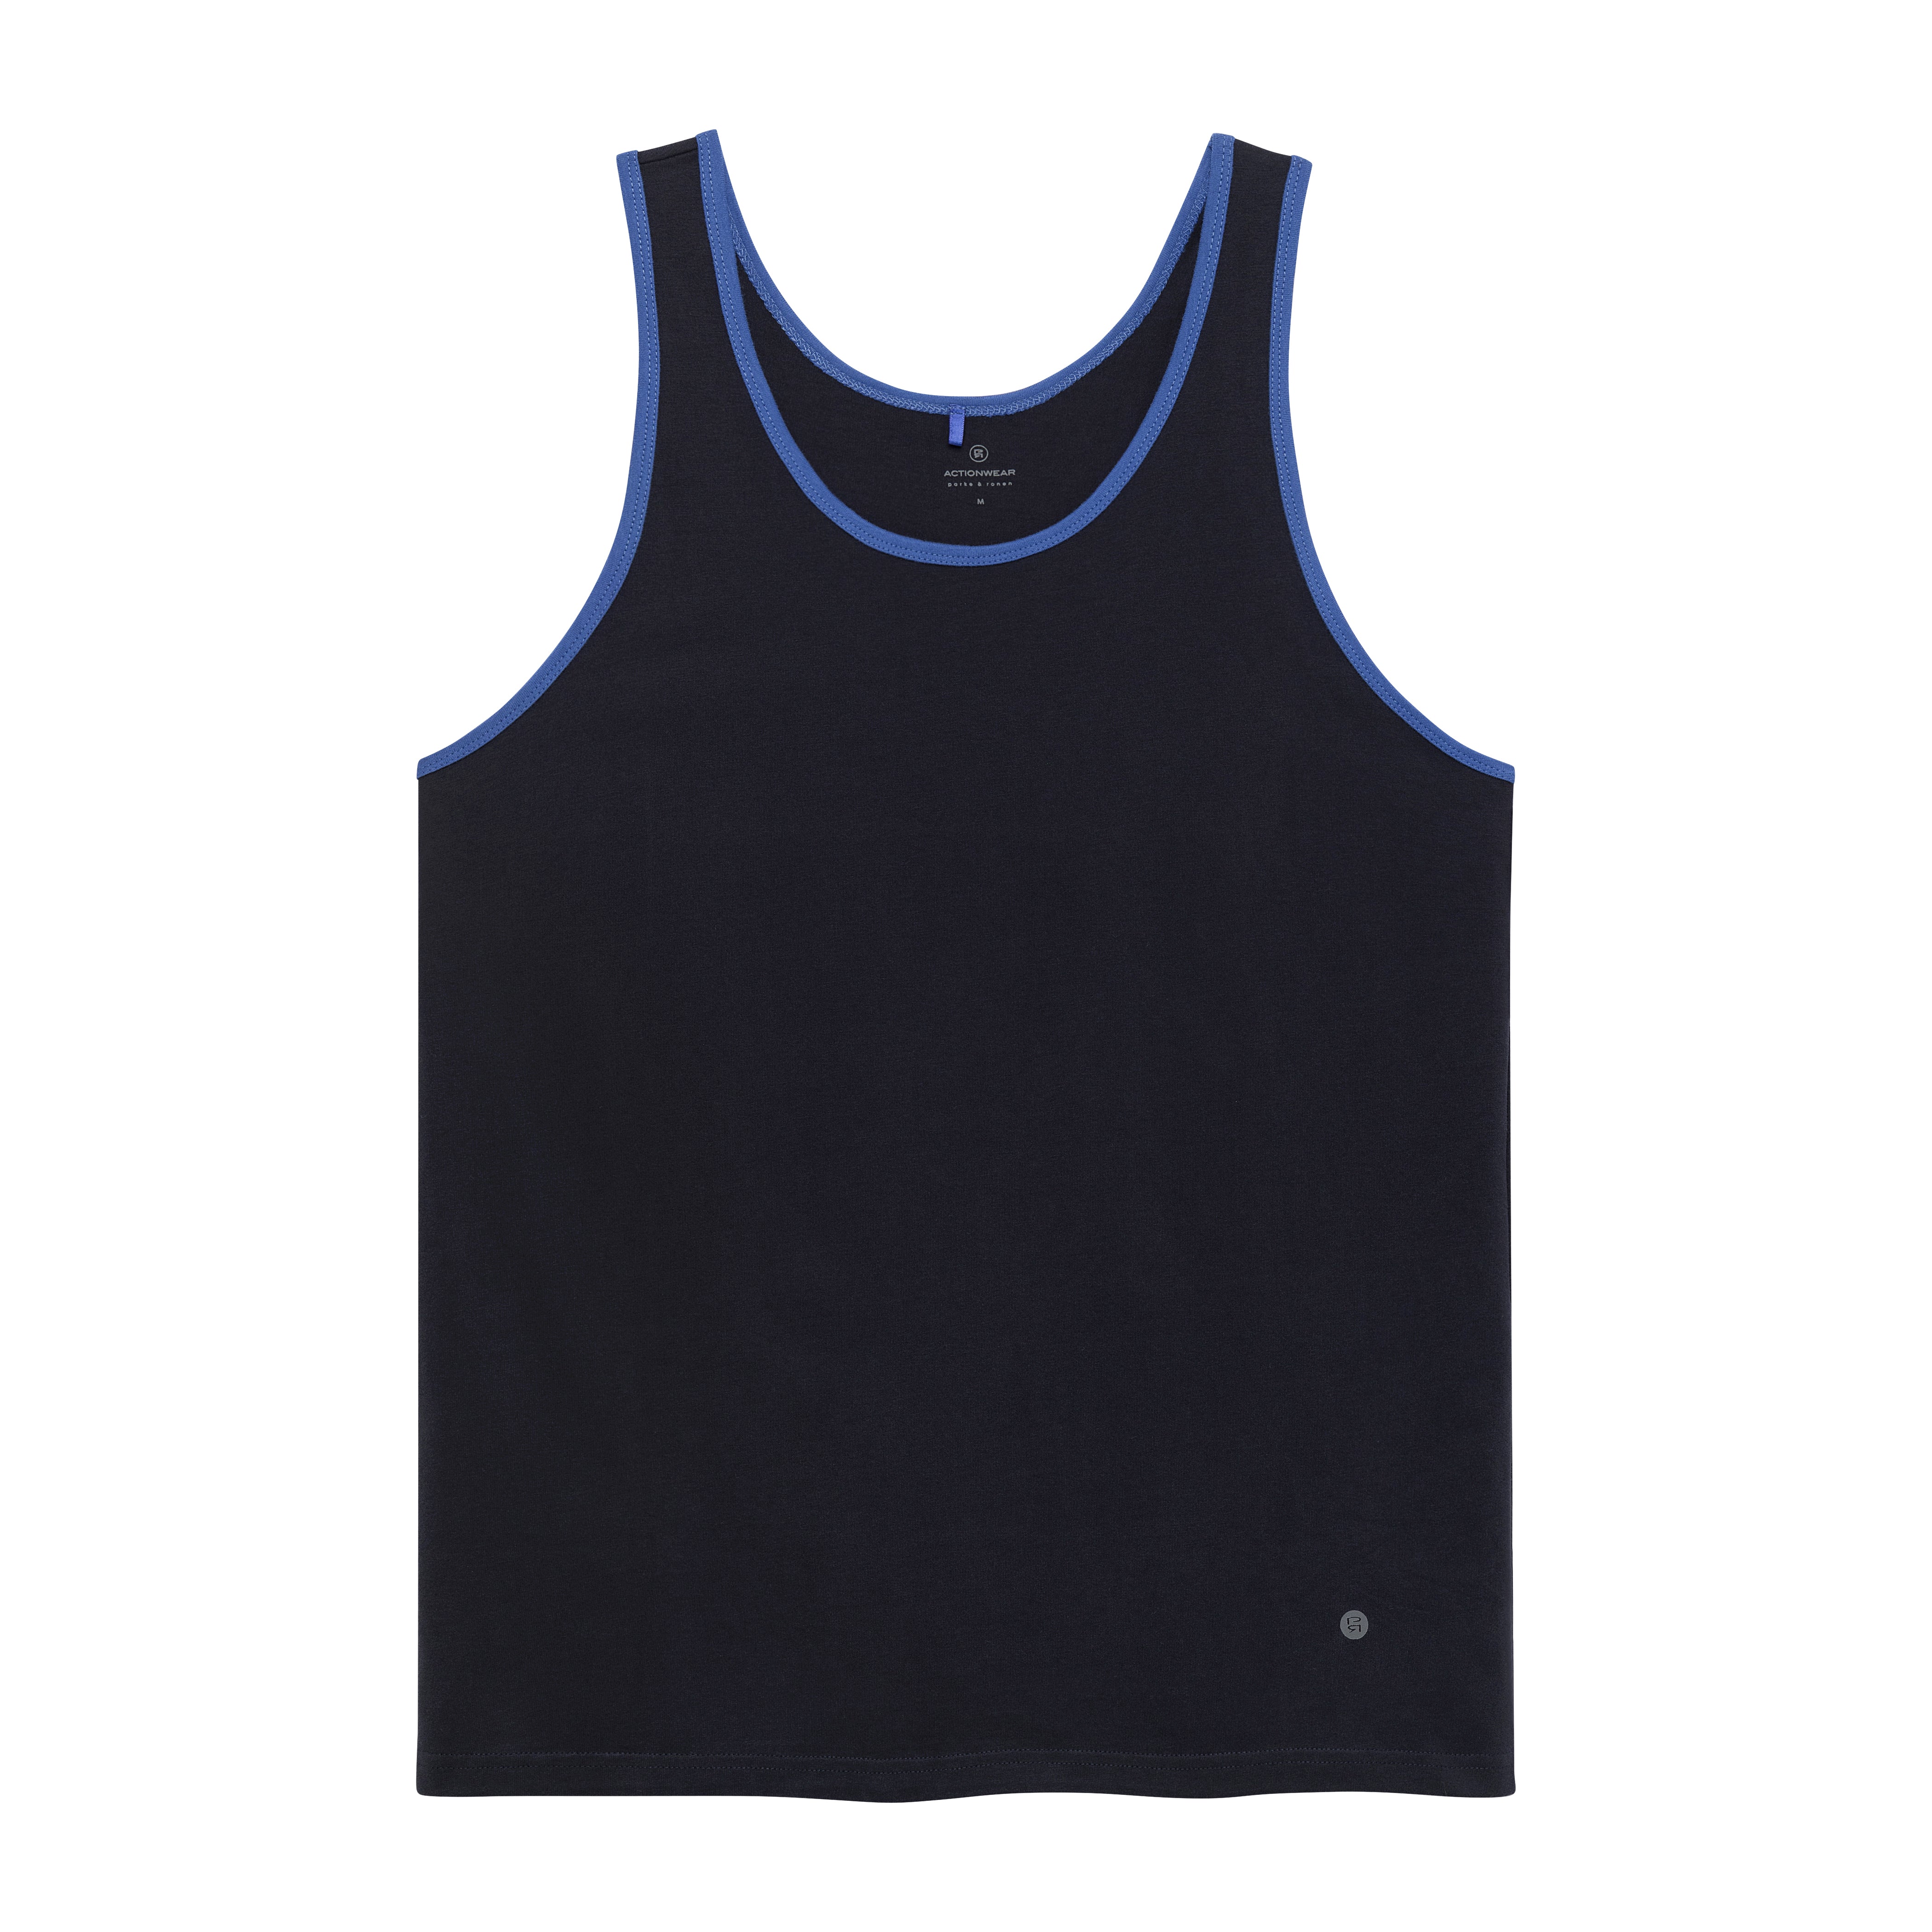 ACTIONWEAR- Navy/Royal Combo Essential Cotton Tank Top